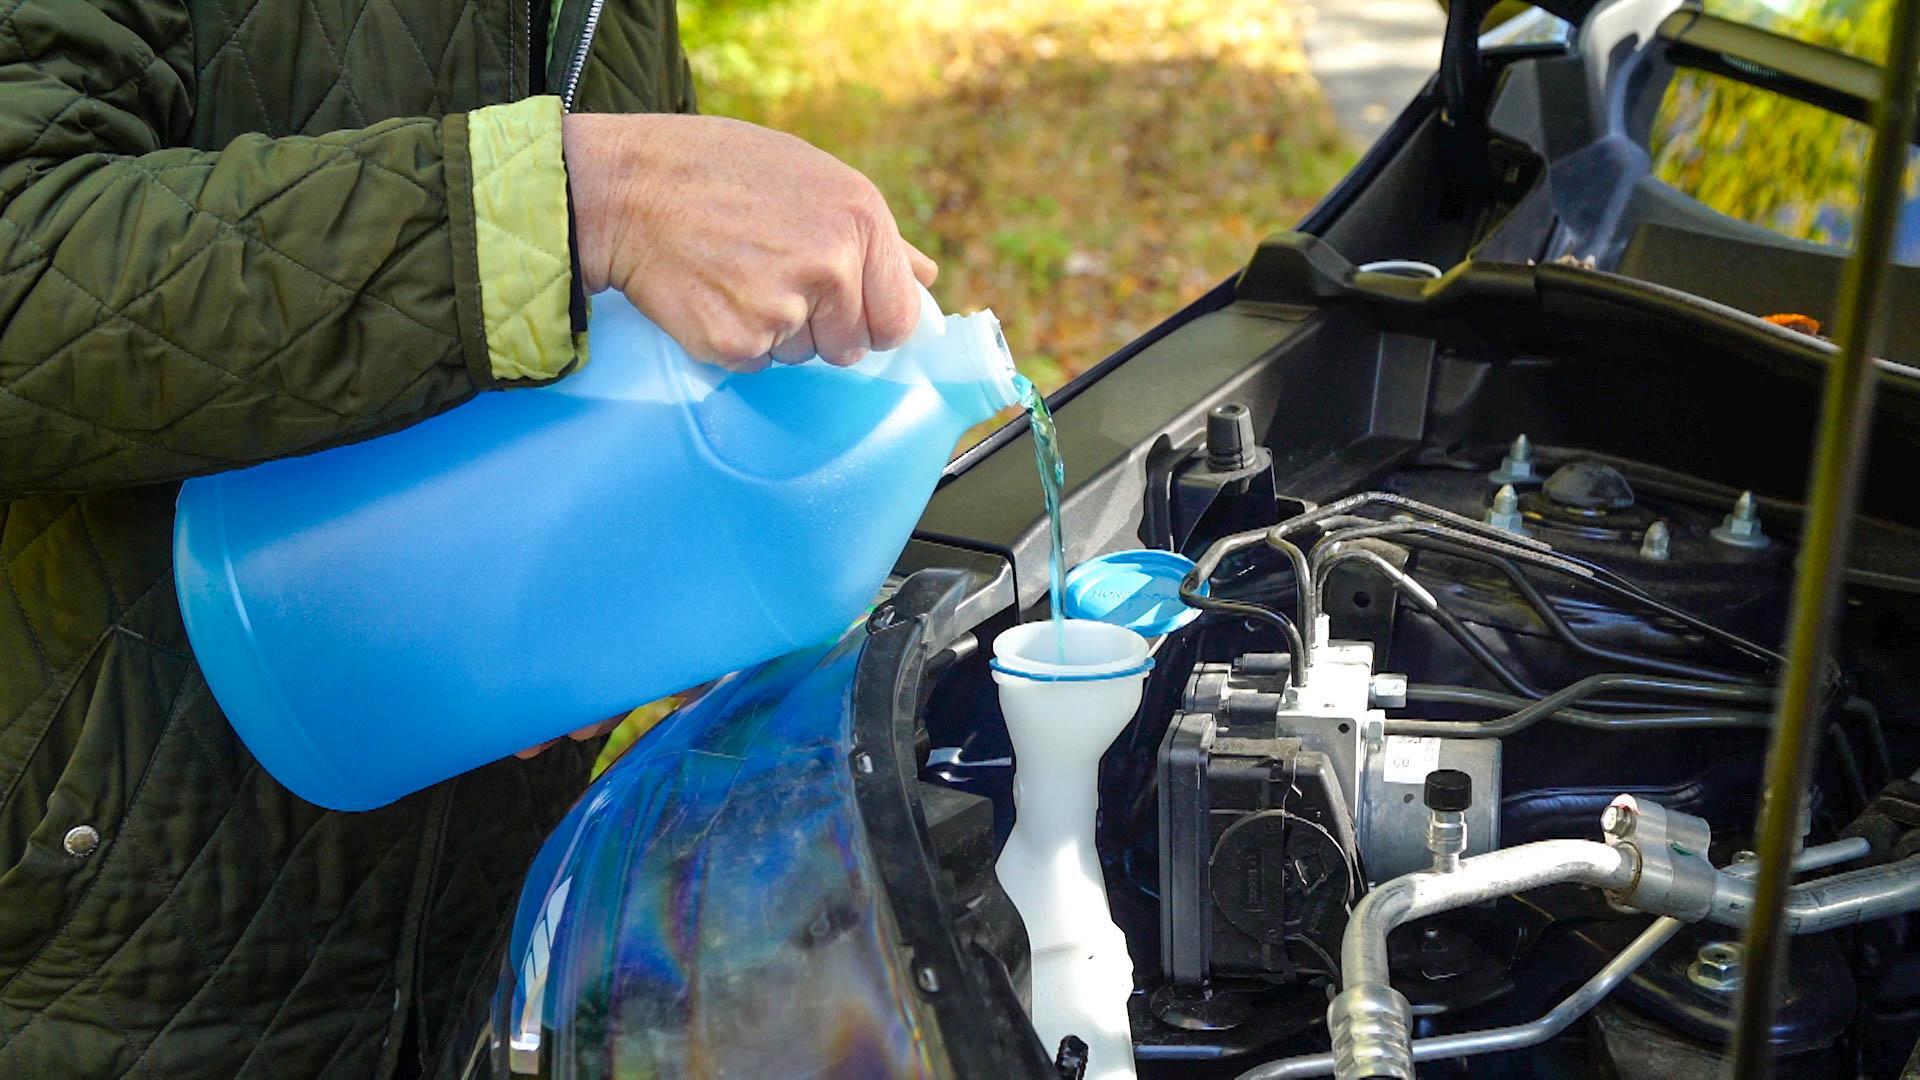 Winter Car Care Tips  Keep Car in Peak Condition - Consumer Reports